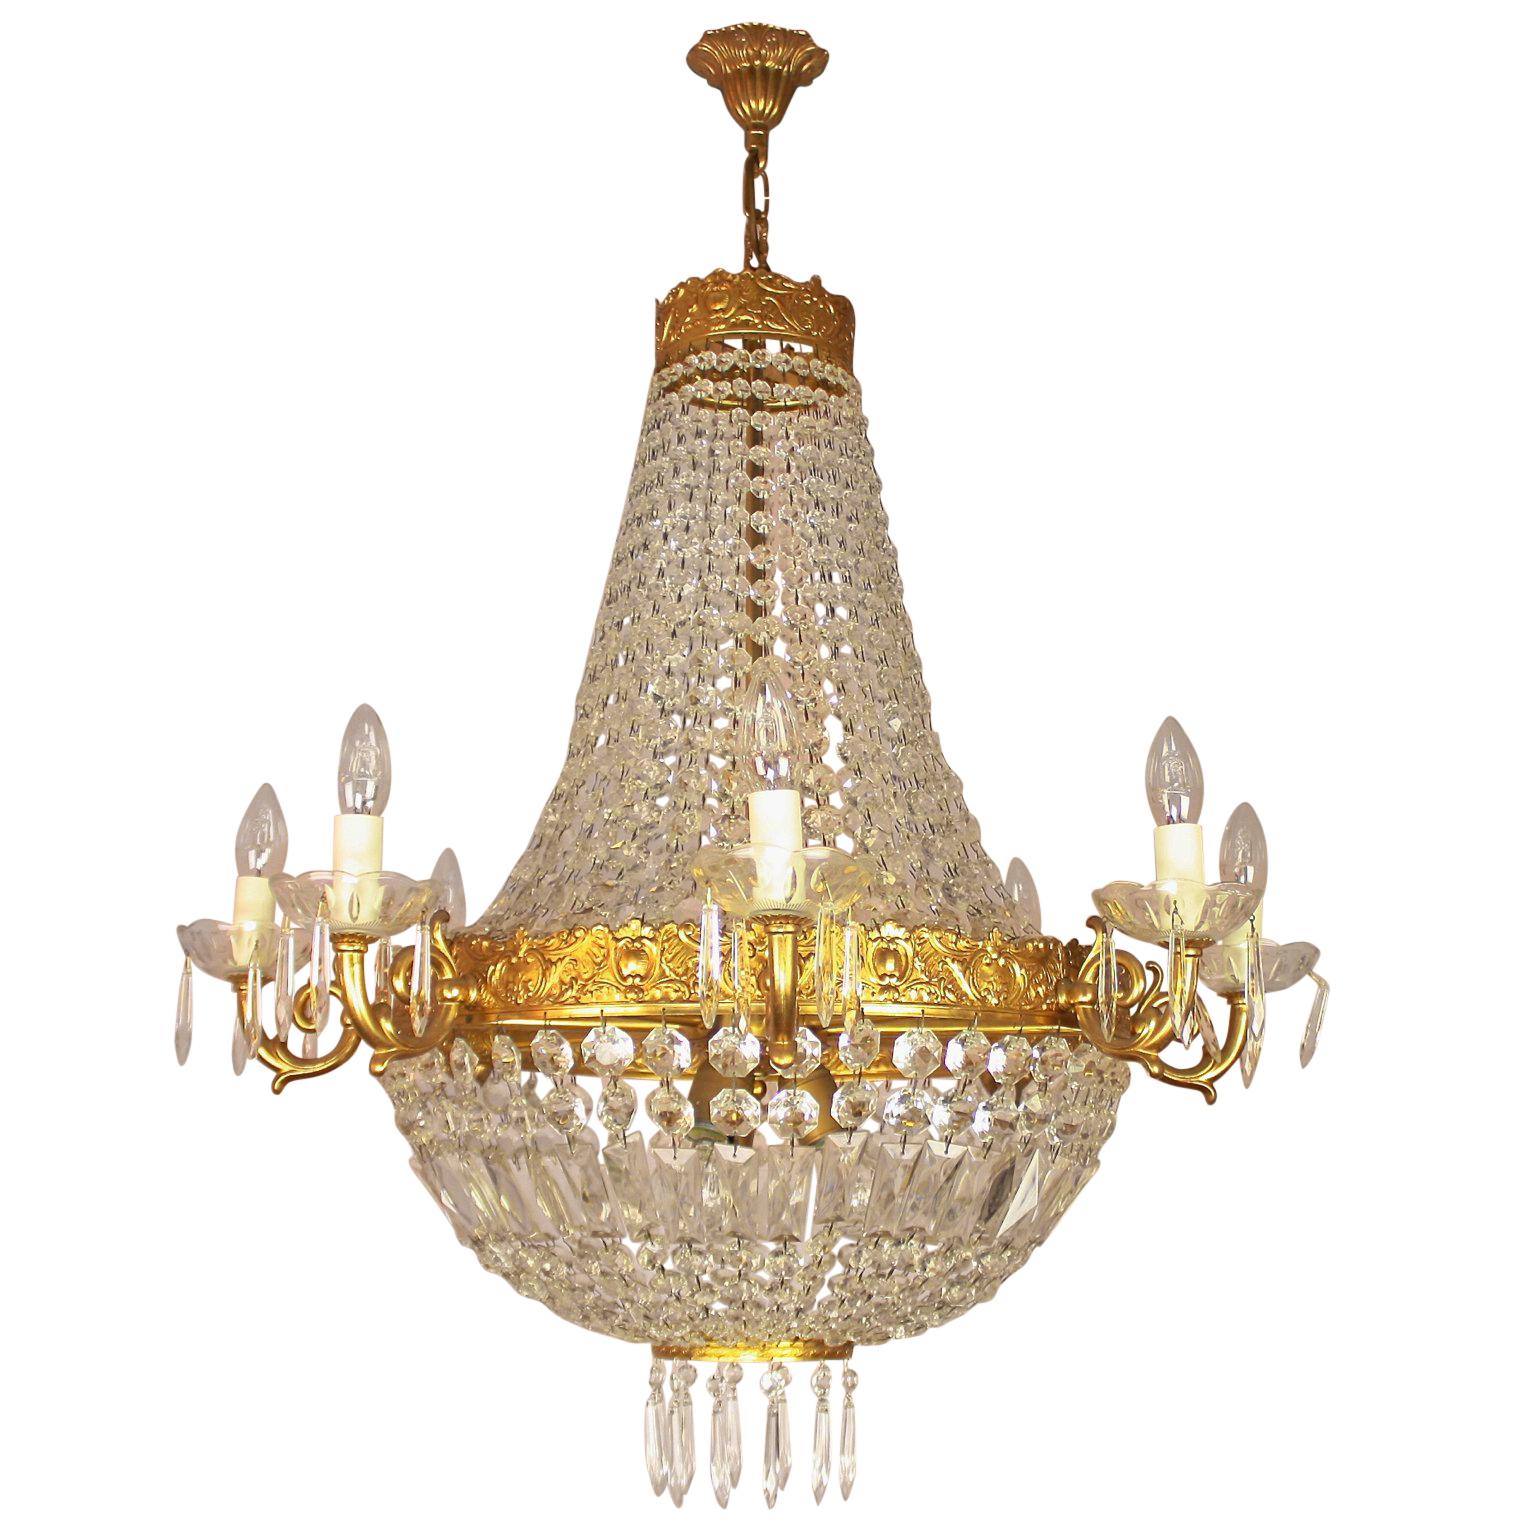 Pair of Empire Style Basket Chandeliers, Early 20th Century